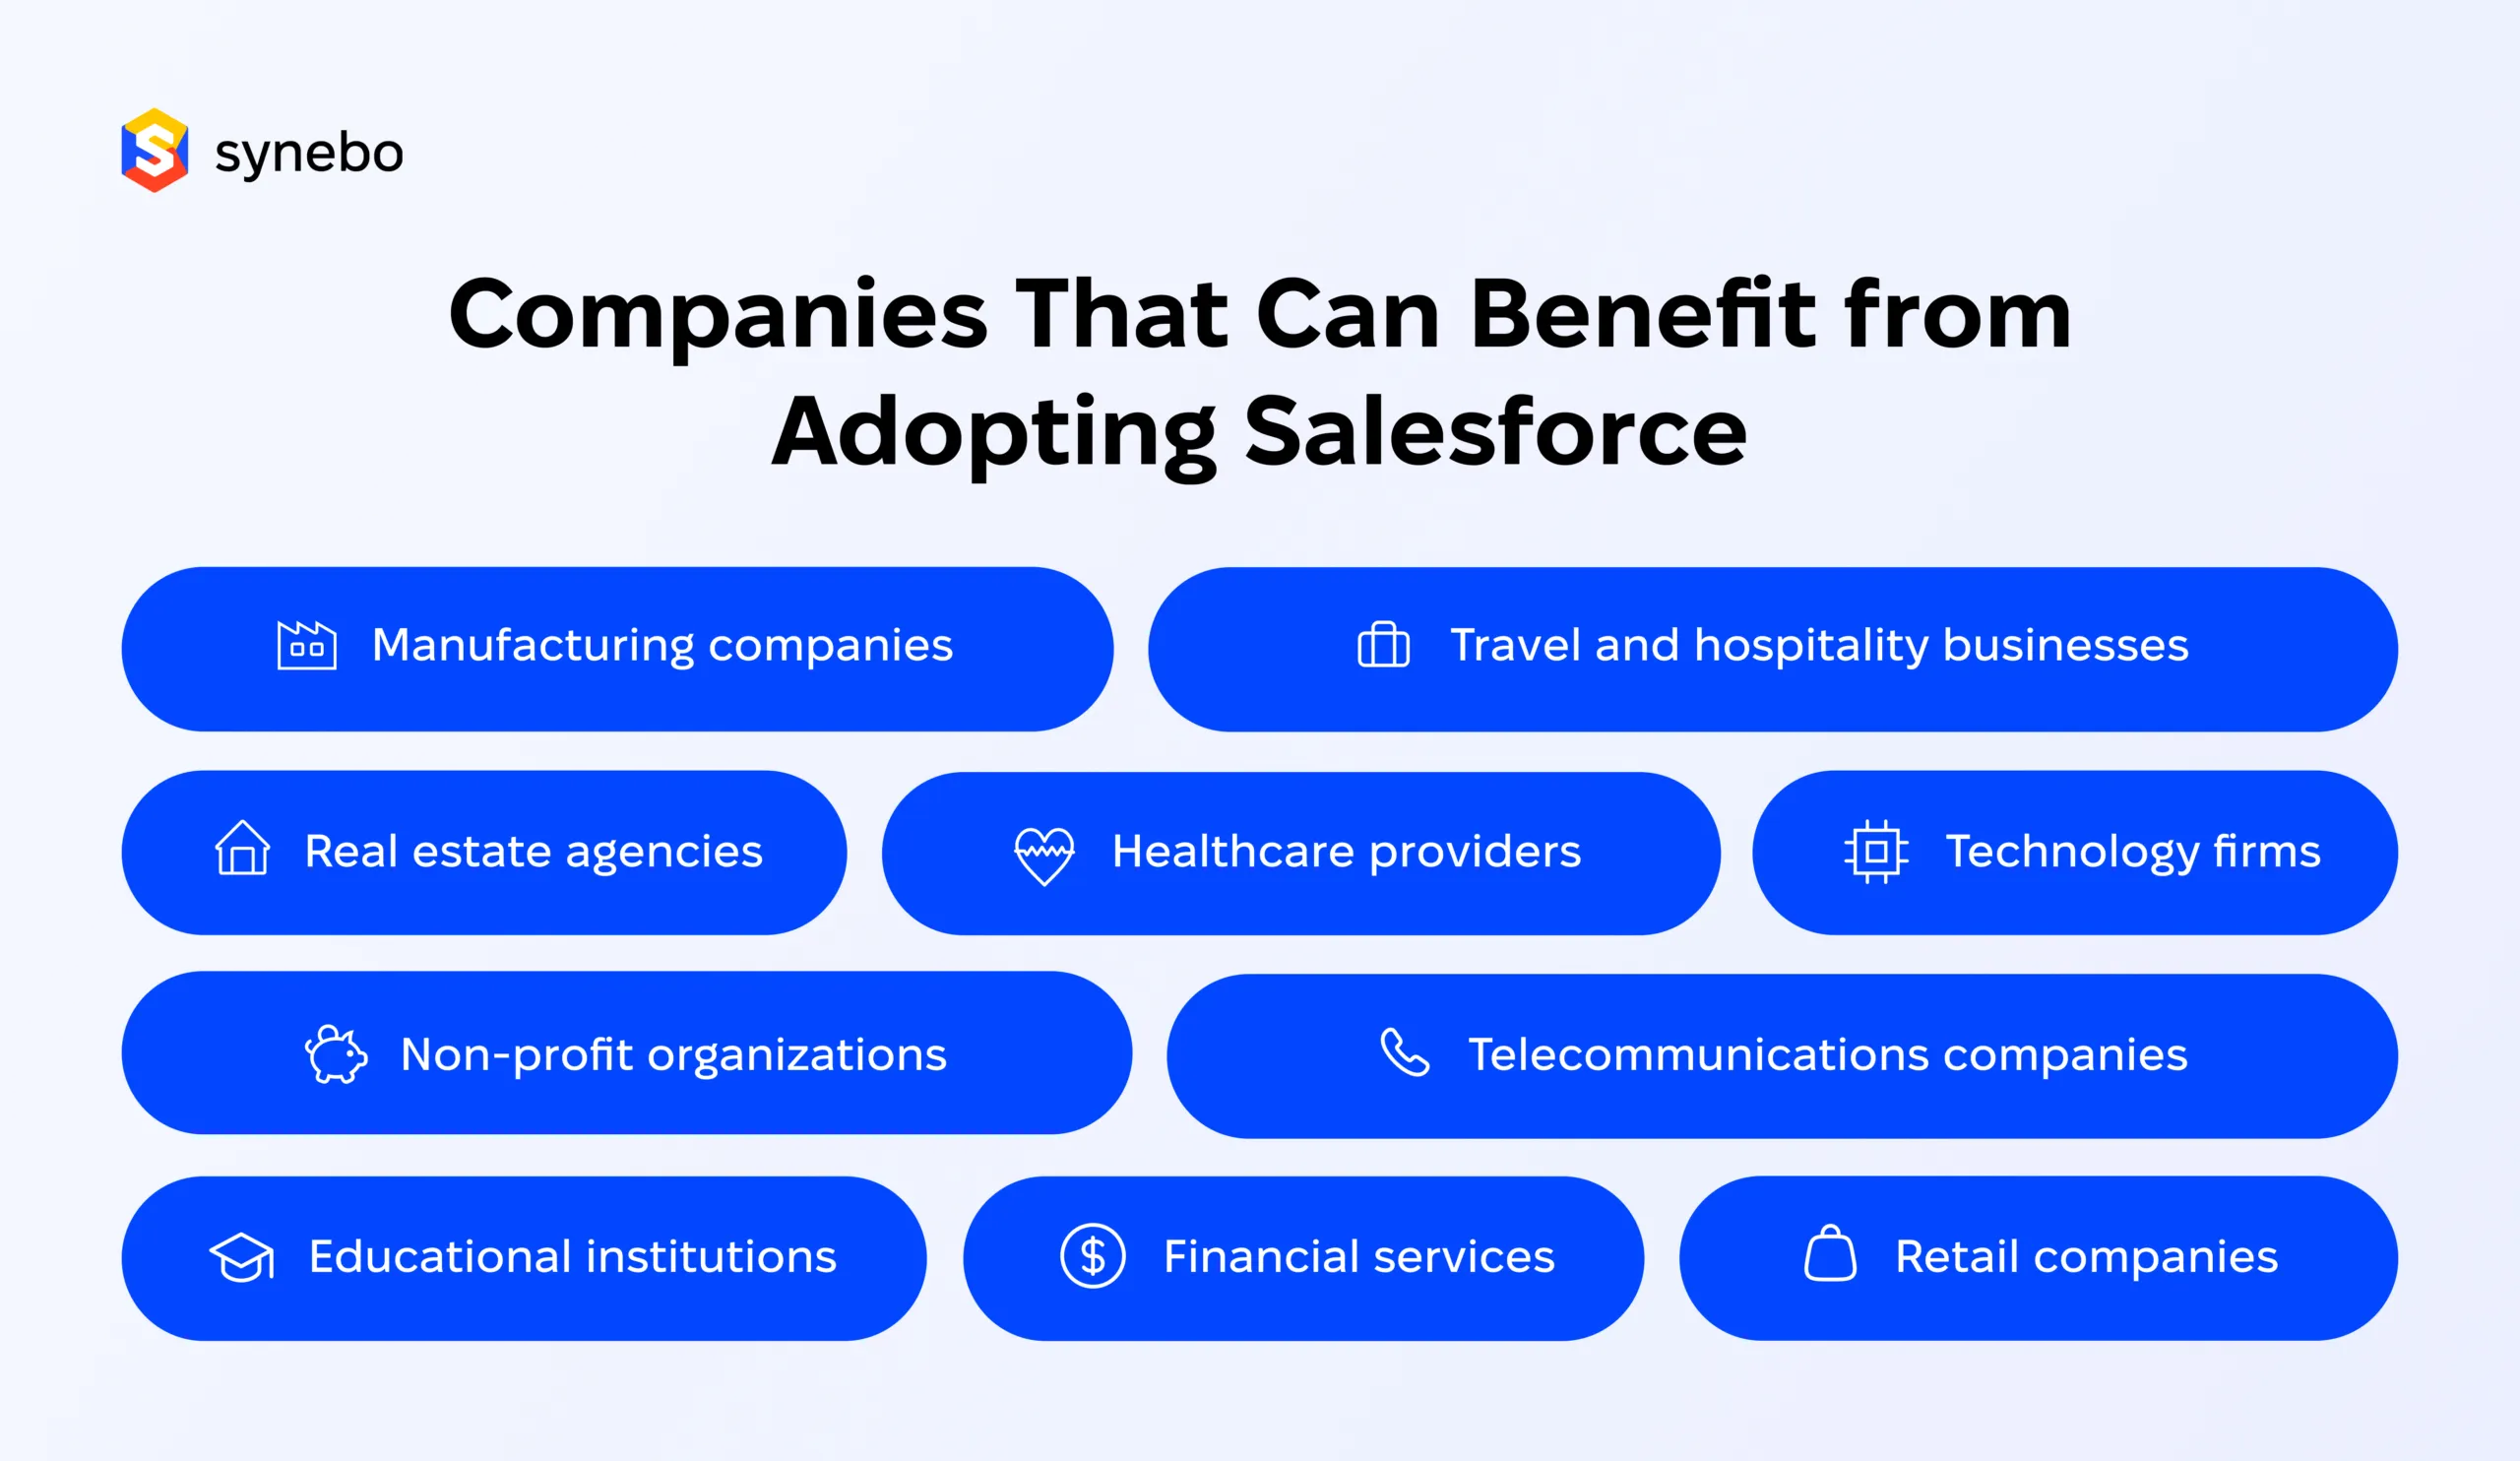 Companies that can benefit from adopting salesforce